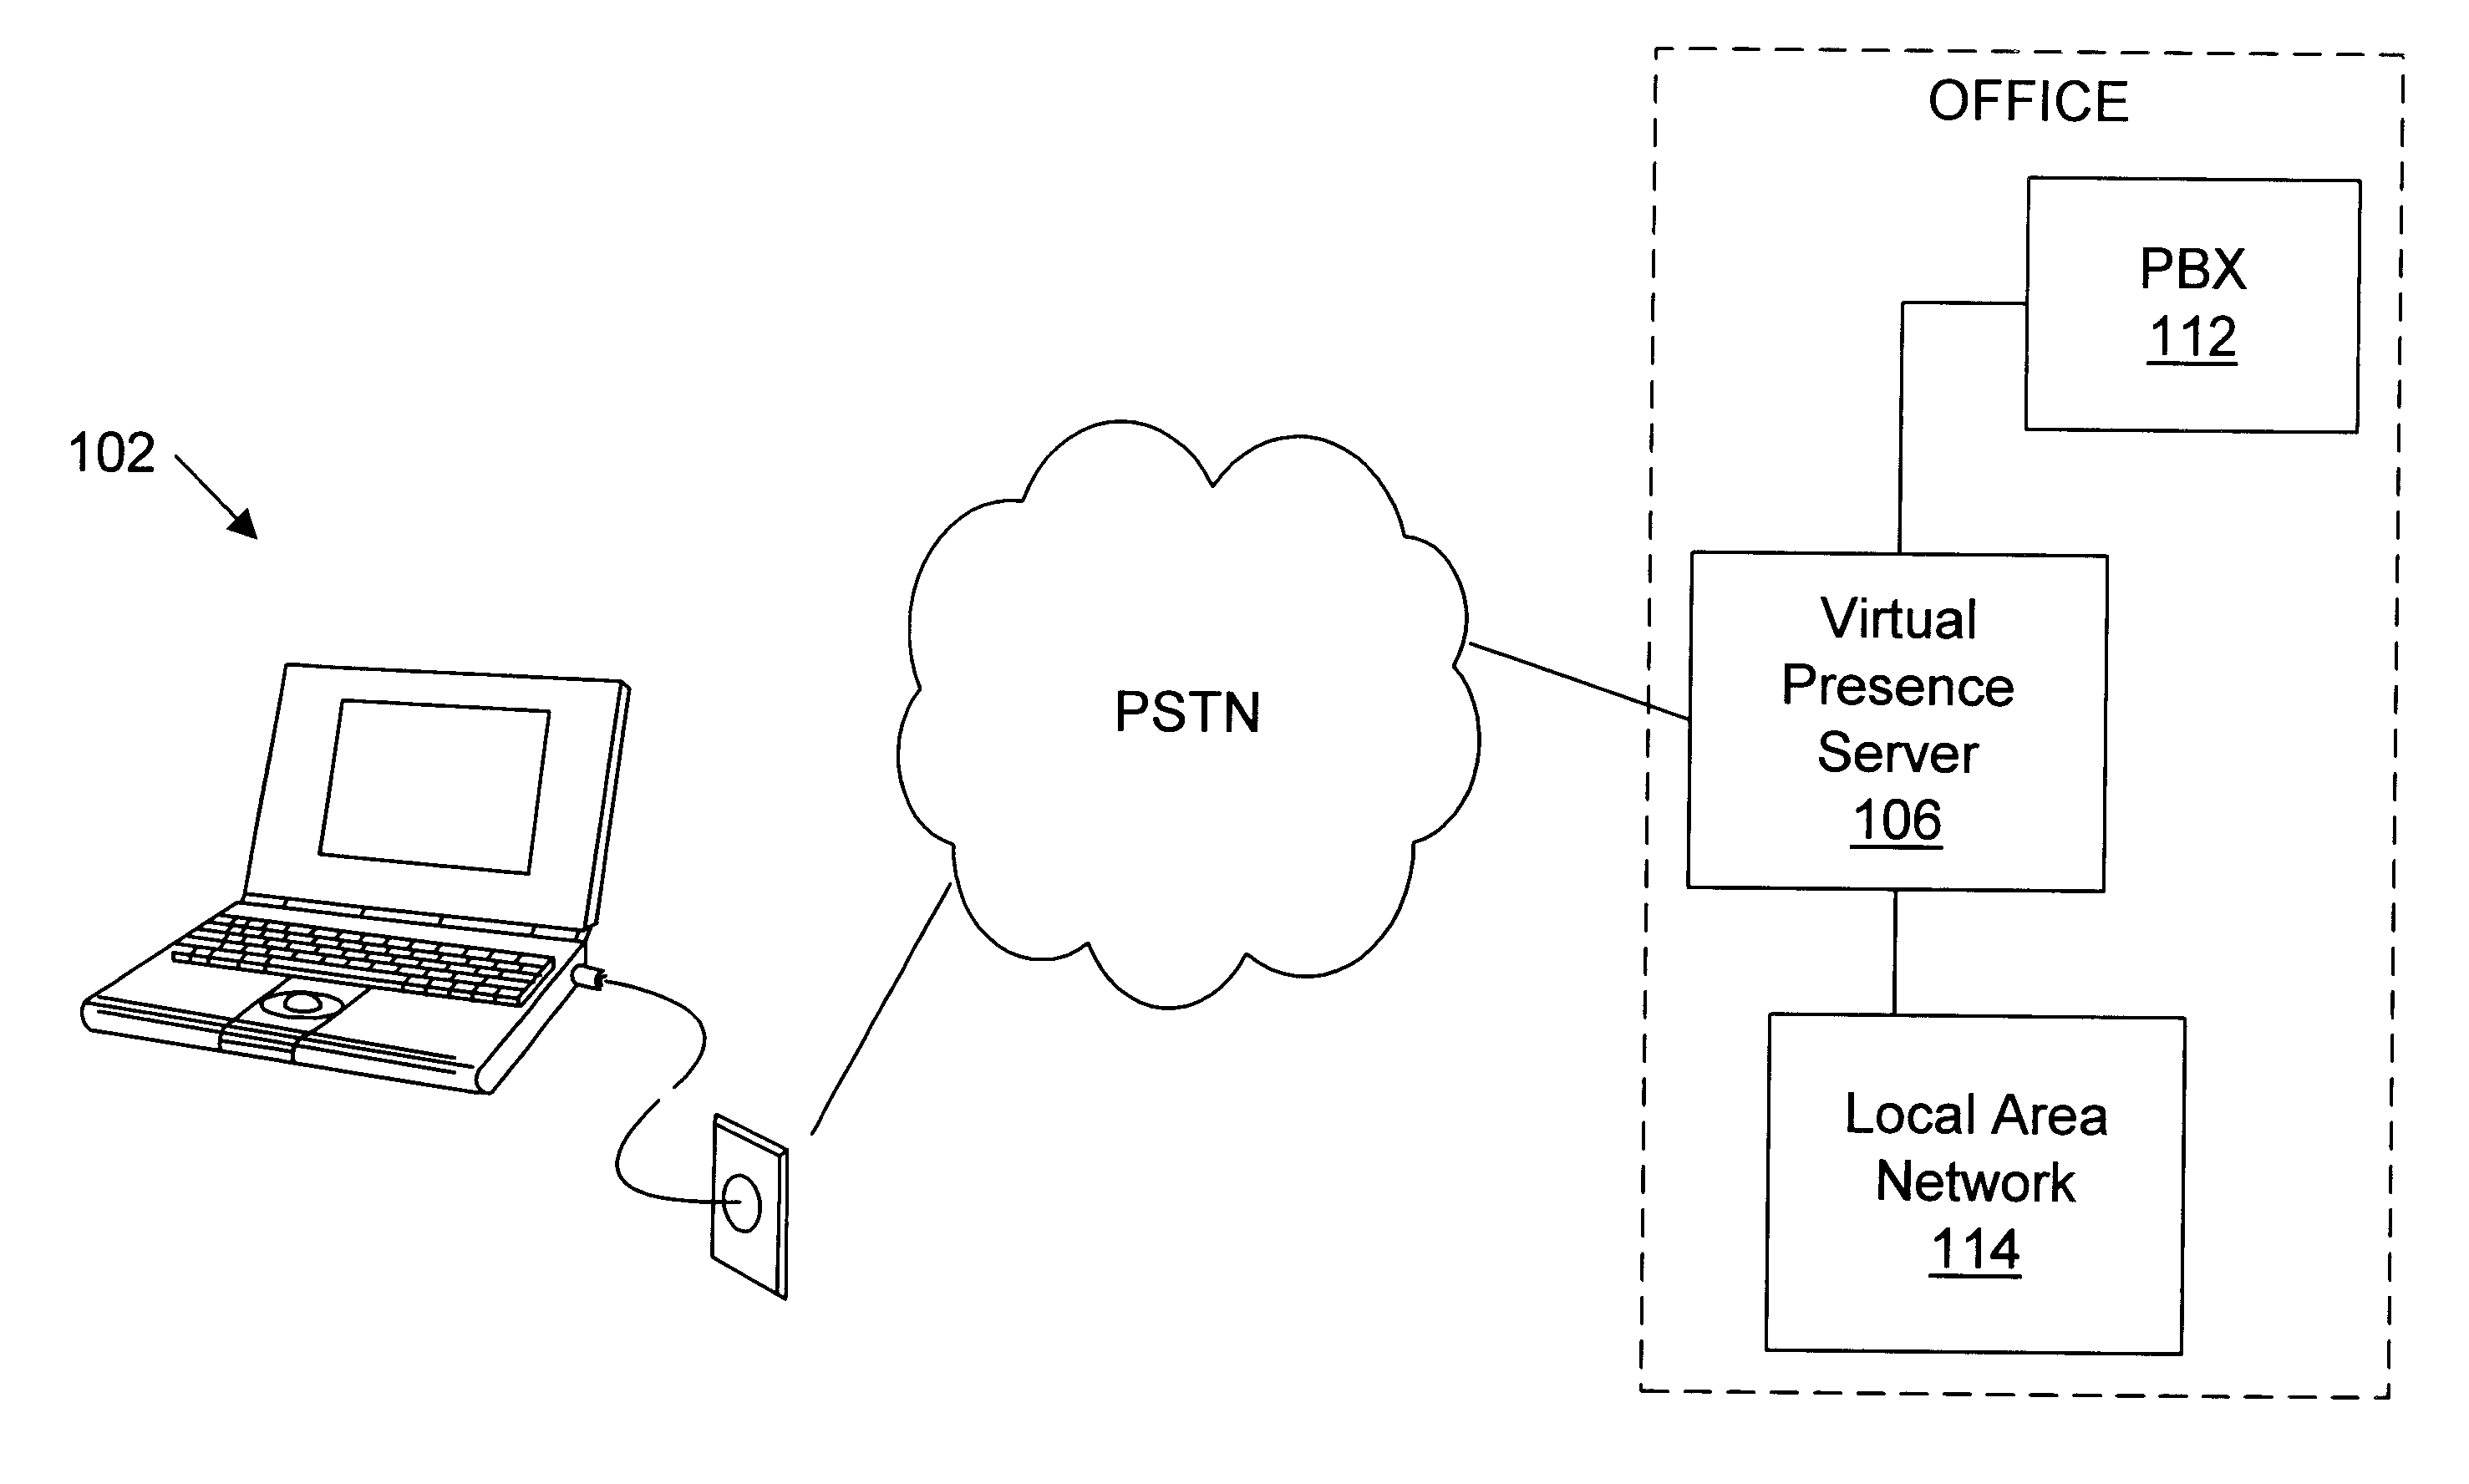 System and method for providing a remote user with a virtual presence to an office